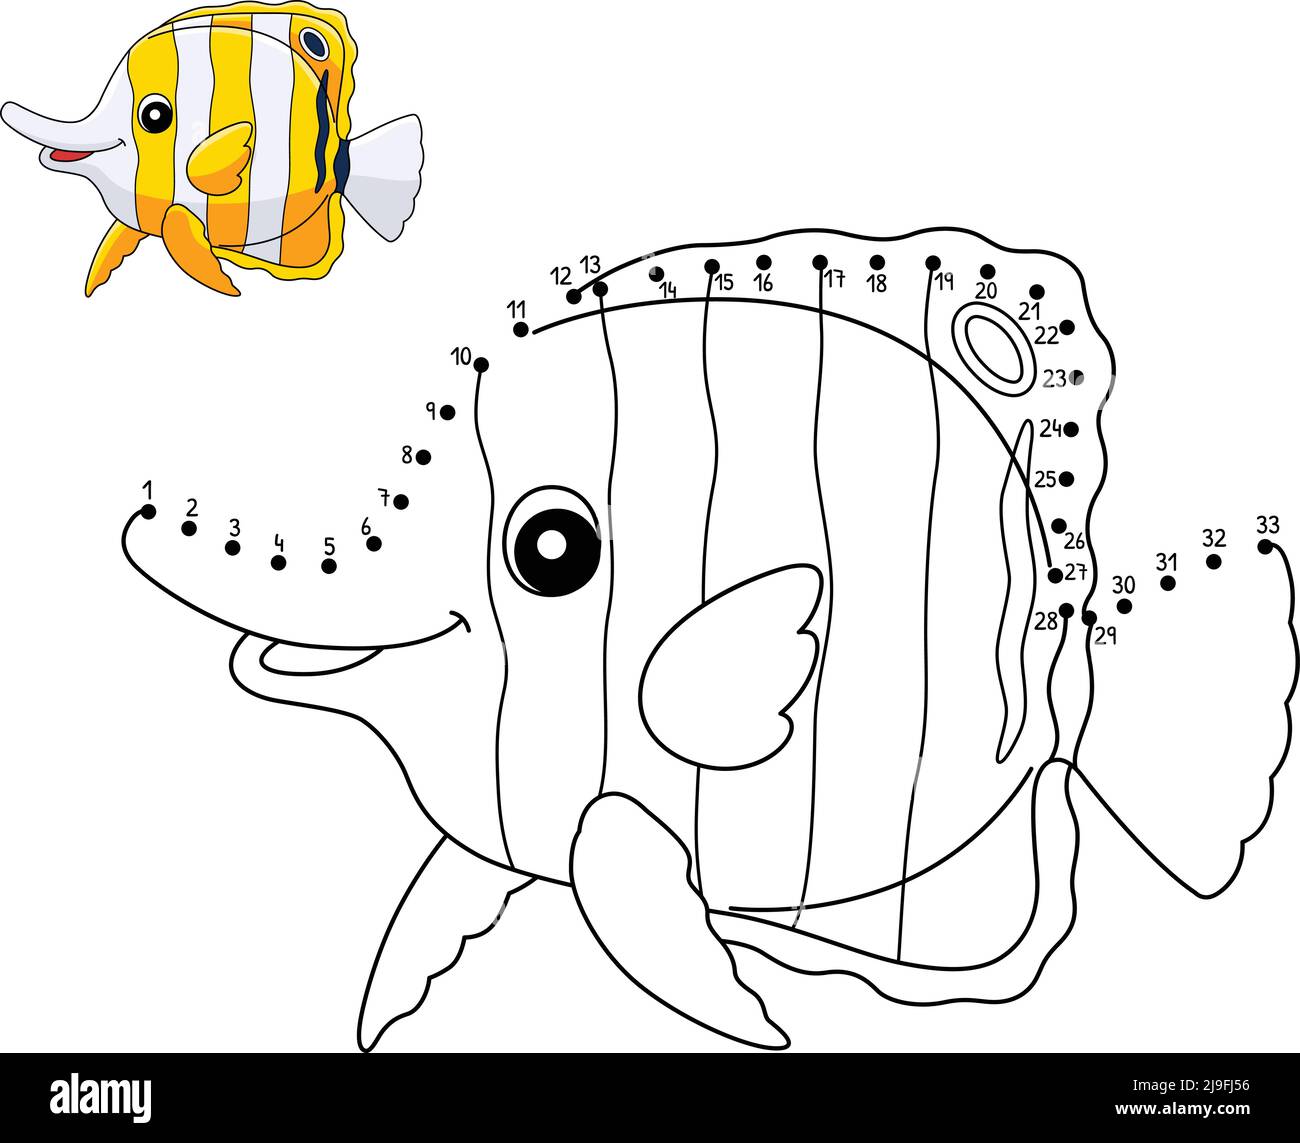 Dot to Dot Butterflyfish Coloring Page for Kids Stock Vector